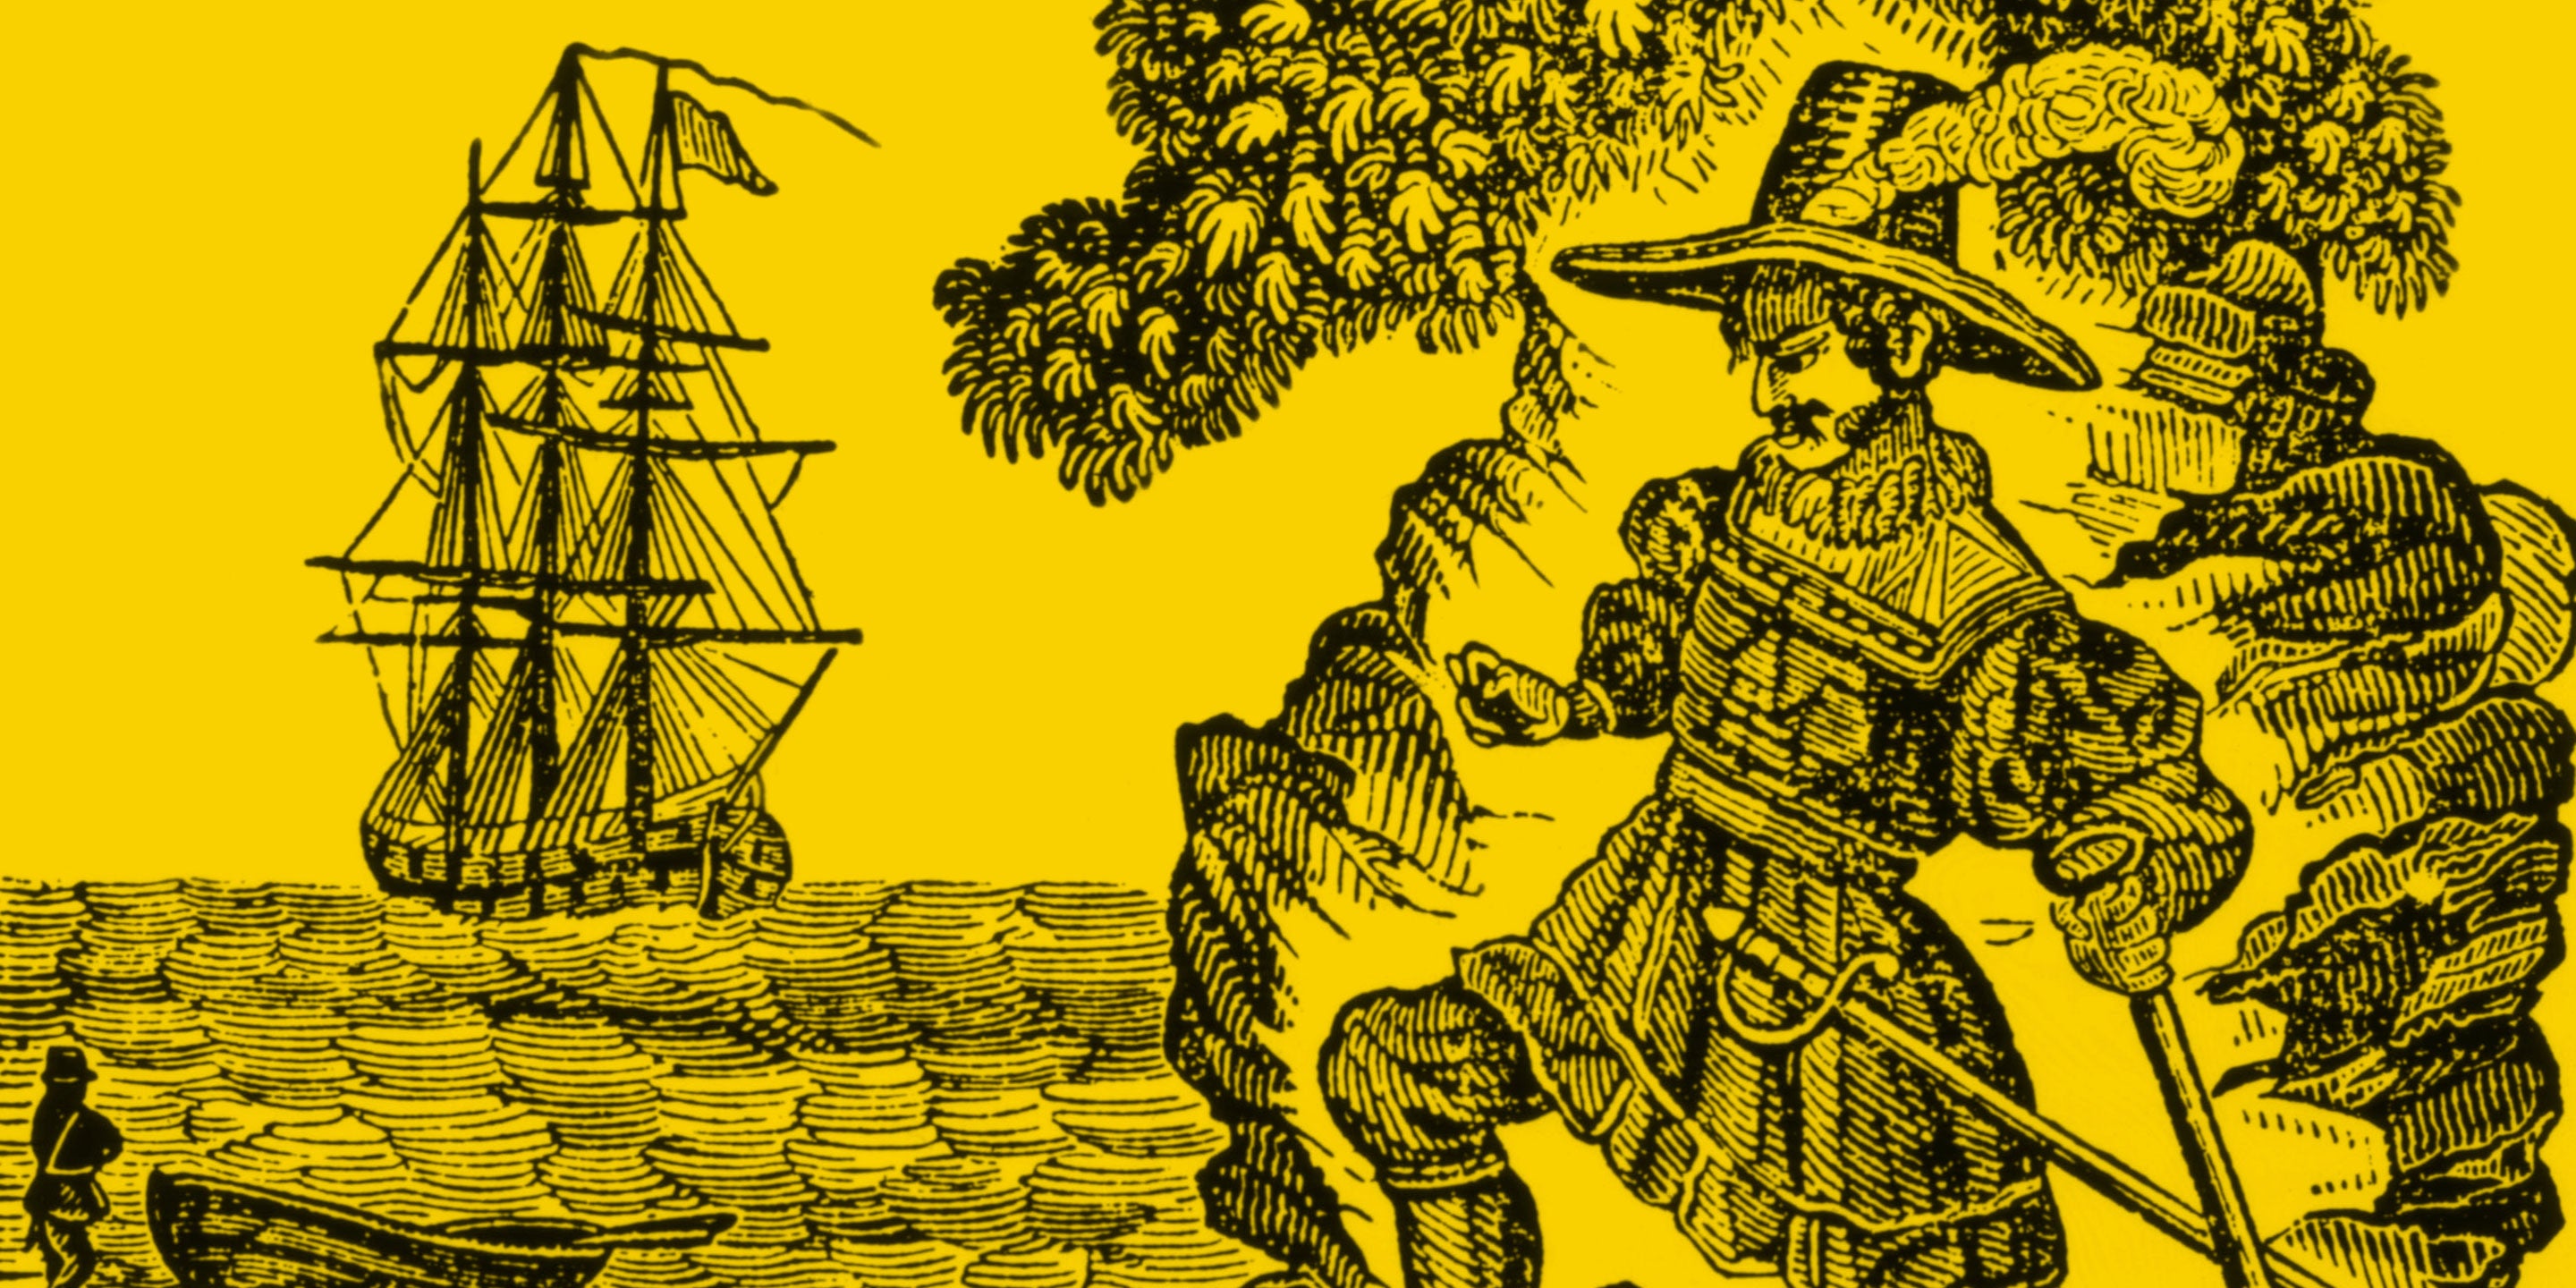 Captain Kidd: Protector to Pirate